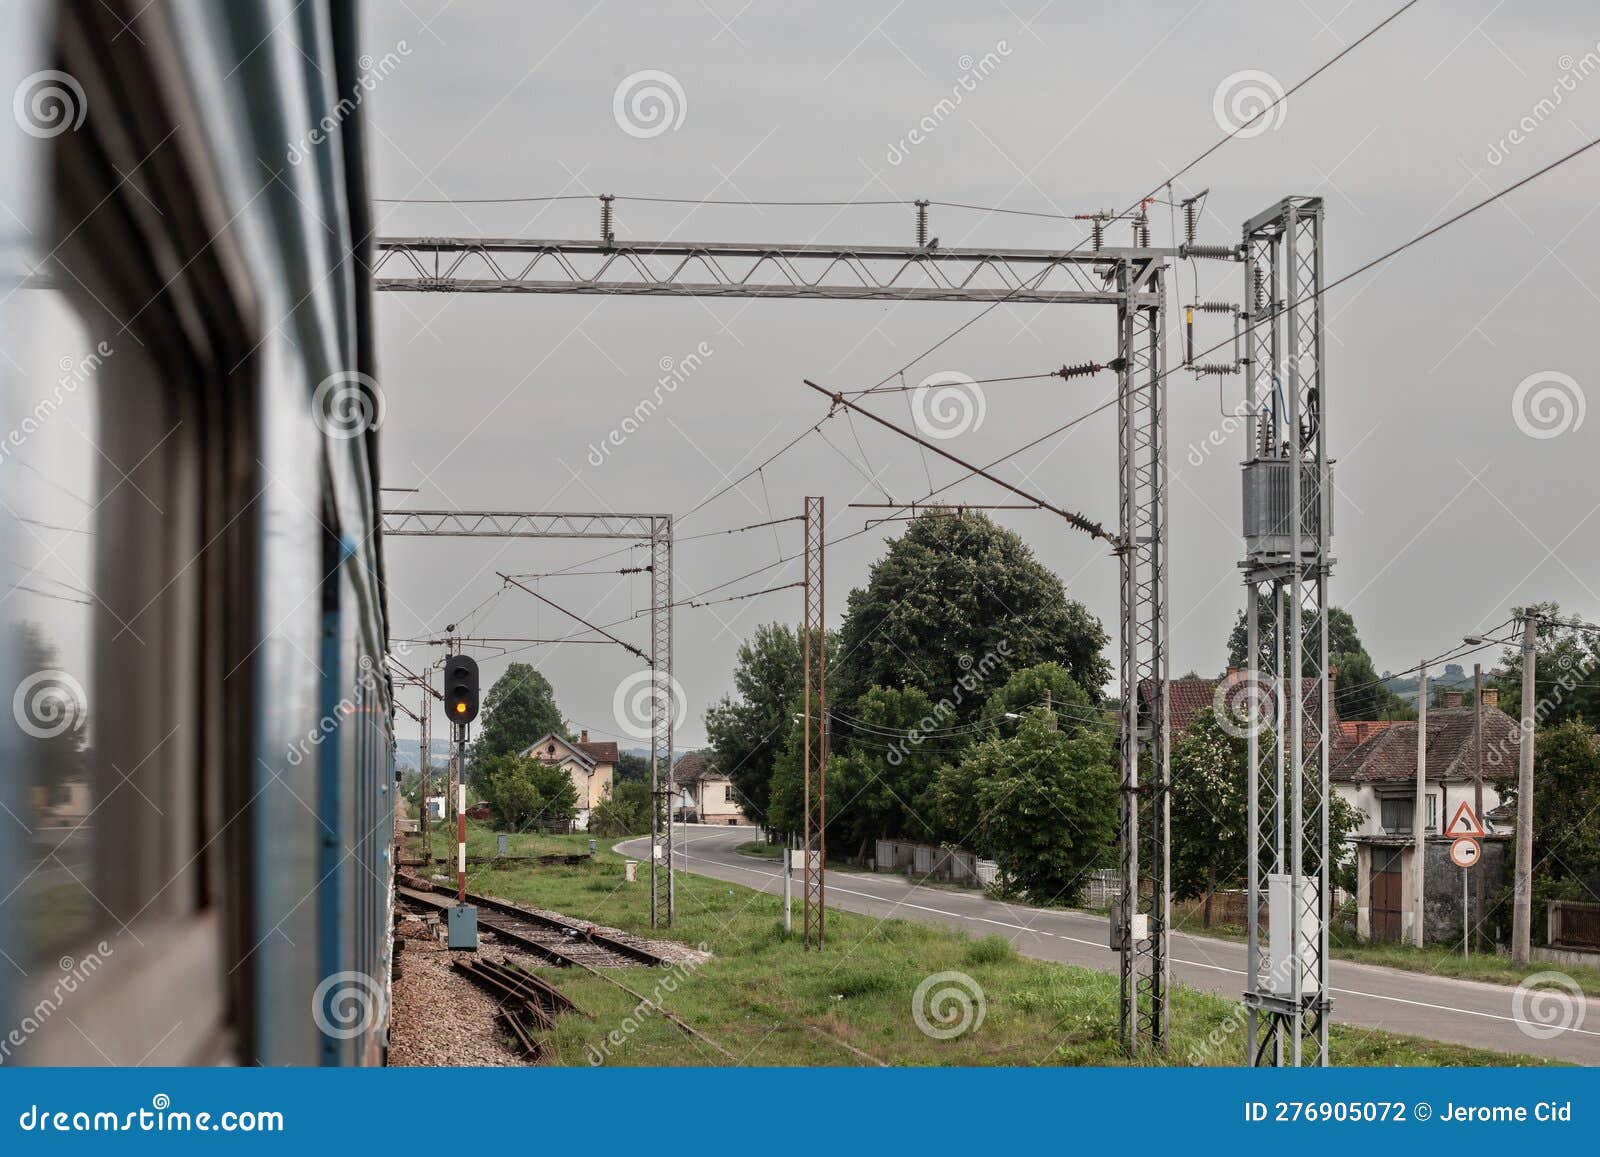 decaying railway infrastructure seen from the window of an electric suburban train, an emu of beovoz bg voz service on a train,